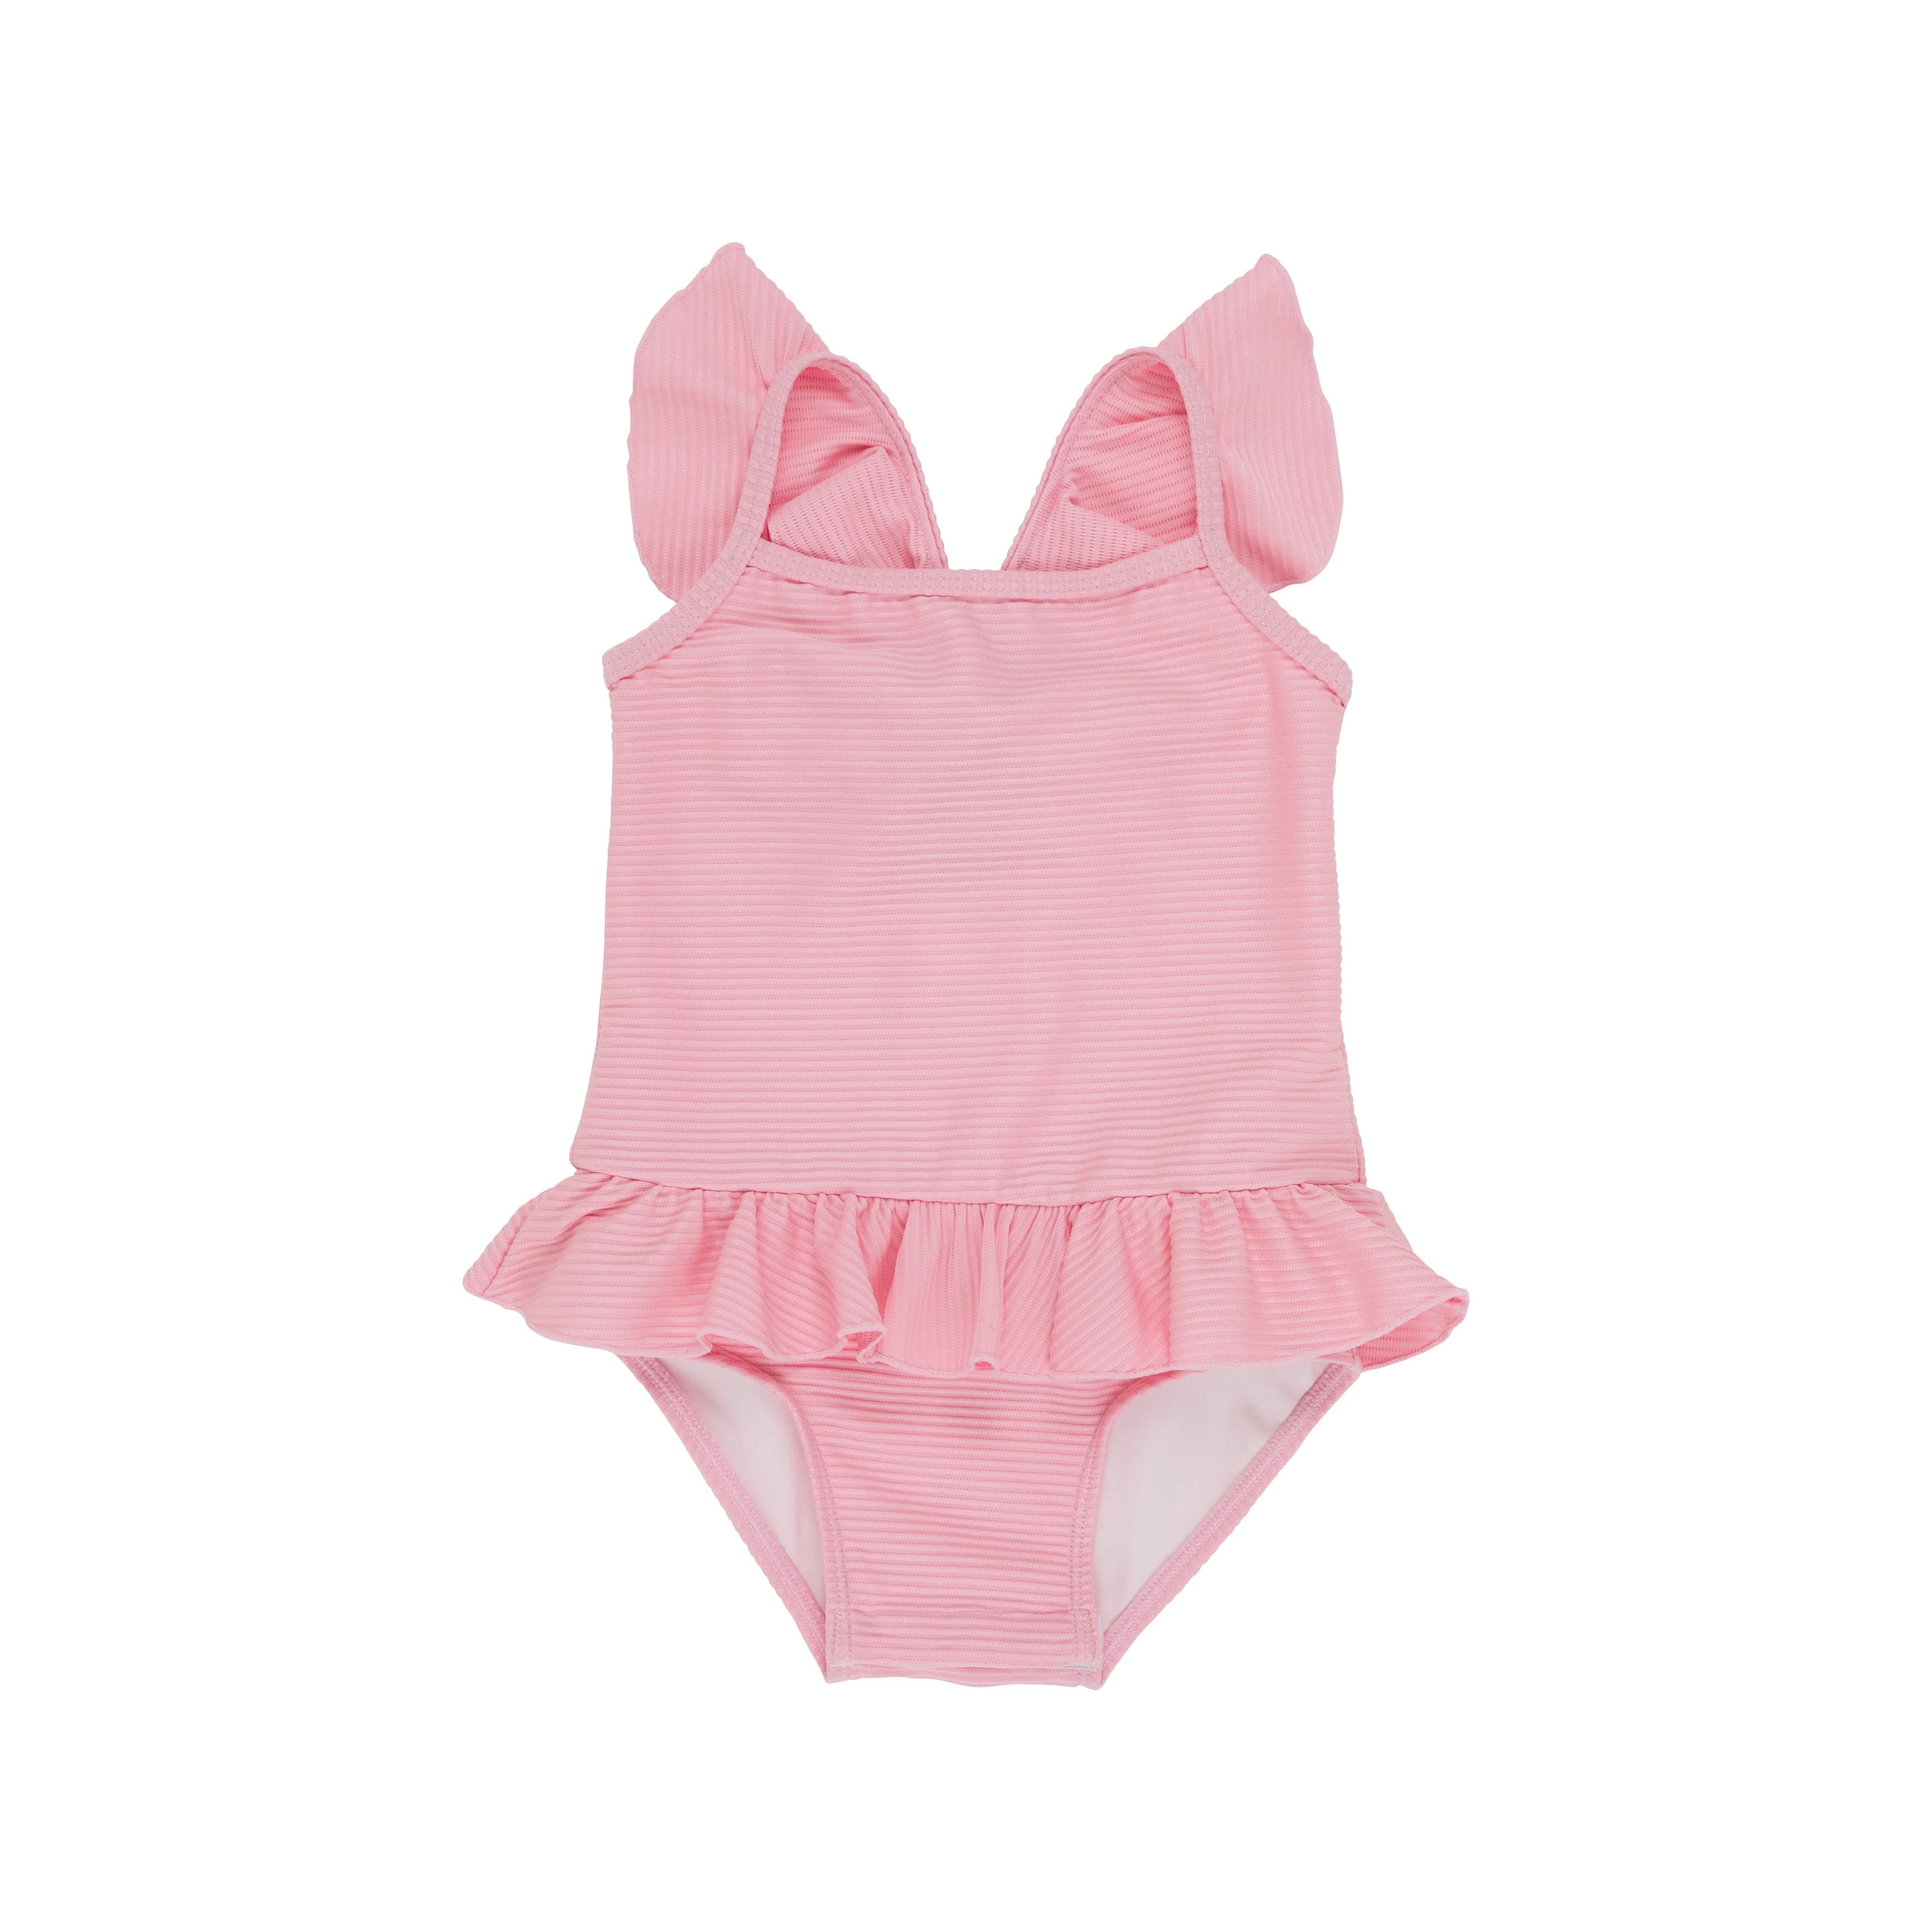 St. Lucia Swimsuit (Ribbed) - Pier Party Pink | The Beaufort Bonnet Company